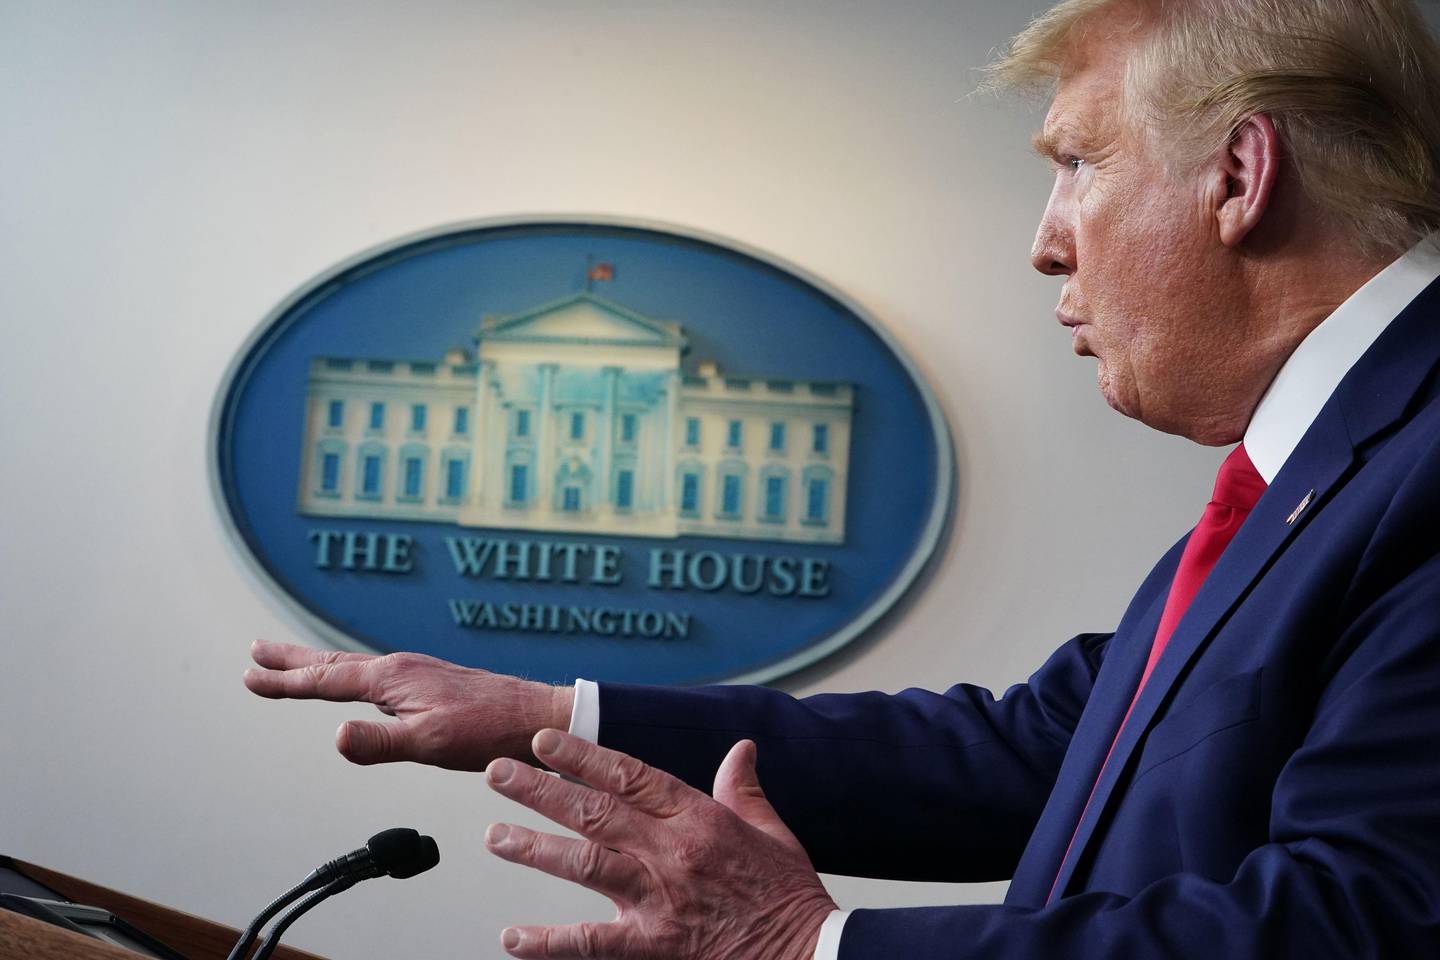 US President Donald Trump speaks during the daily briefing on the novel coronavirus, COVID-19, in the Brady Briefing Room at the White House on April 6, 2020, in Washington, DC. (Photo by MANDEL NGAN / AFP)